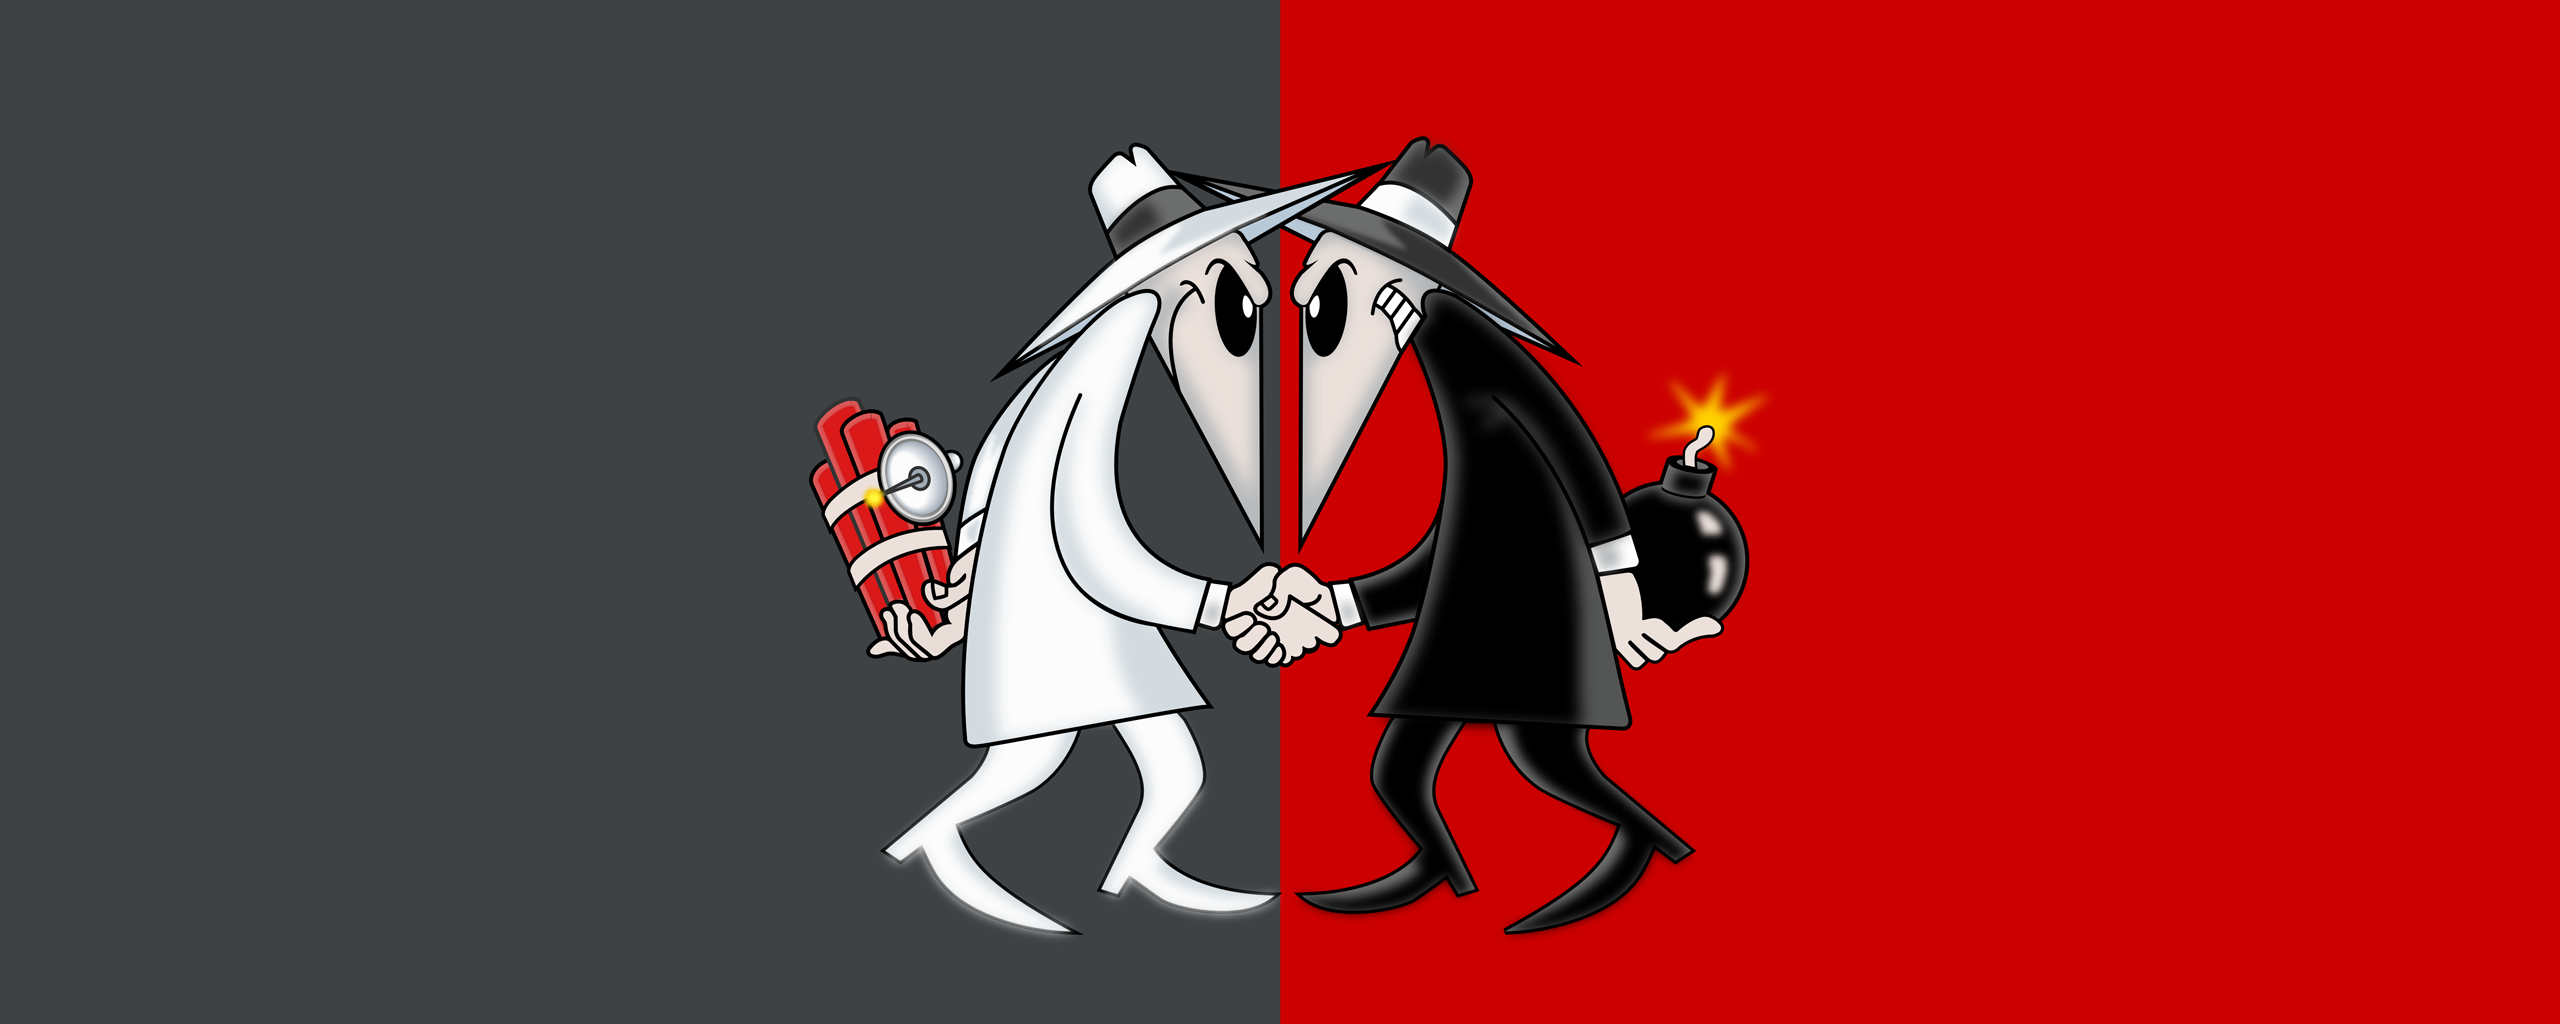 6 Spy Vs. Spy HD Wallpapers | Background Images - Wallpaper Abyss